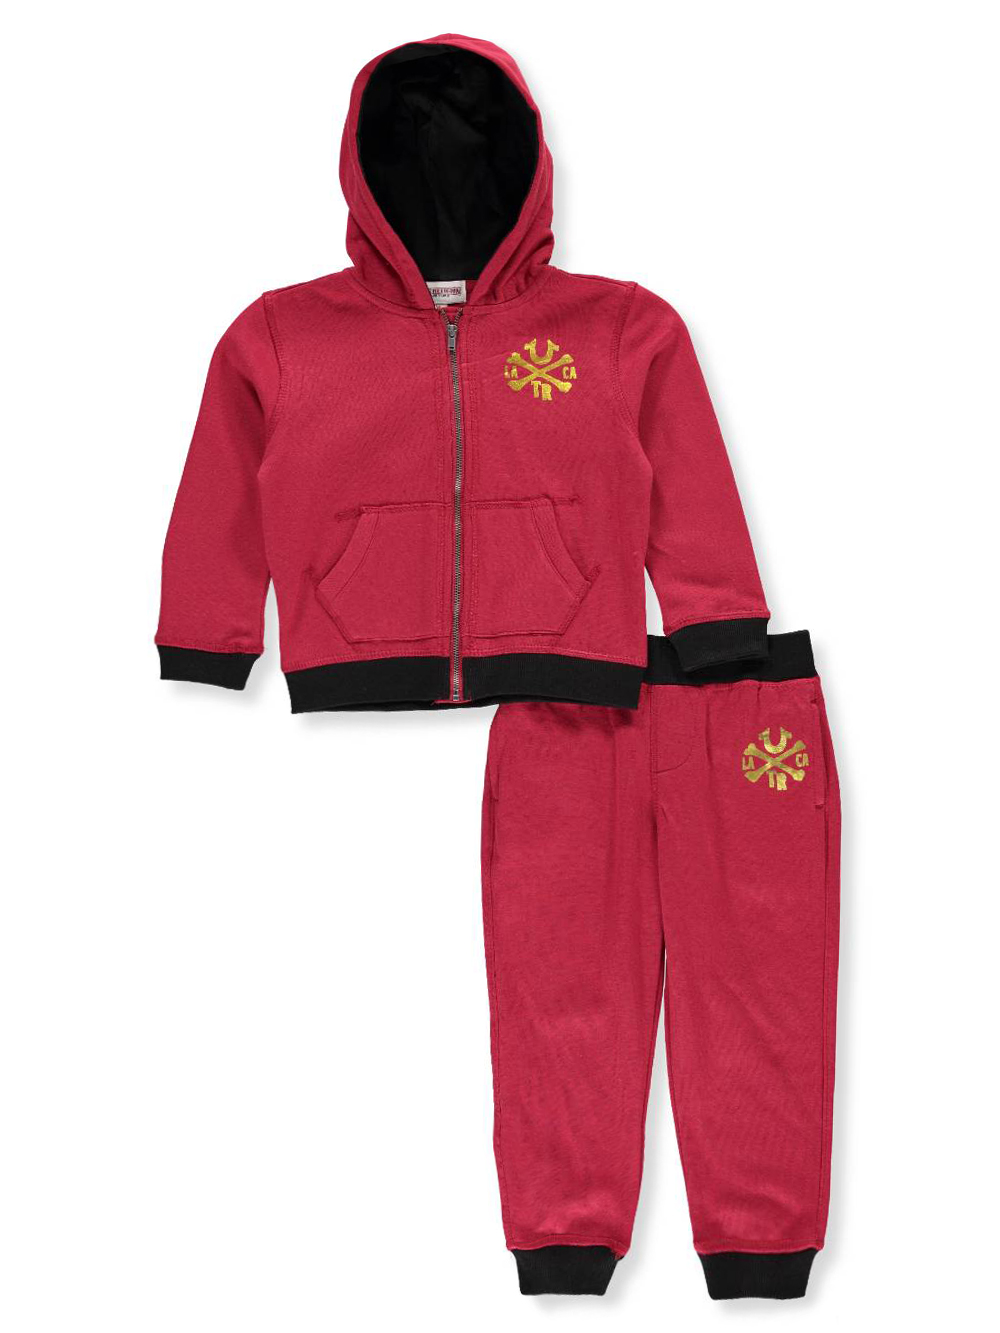 all red true religion sweat suit